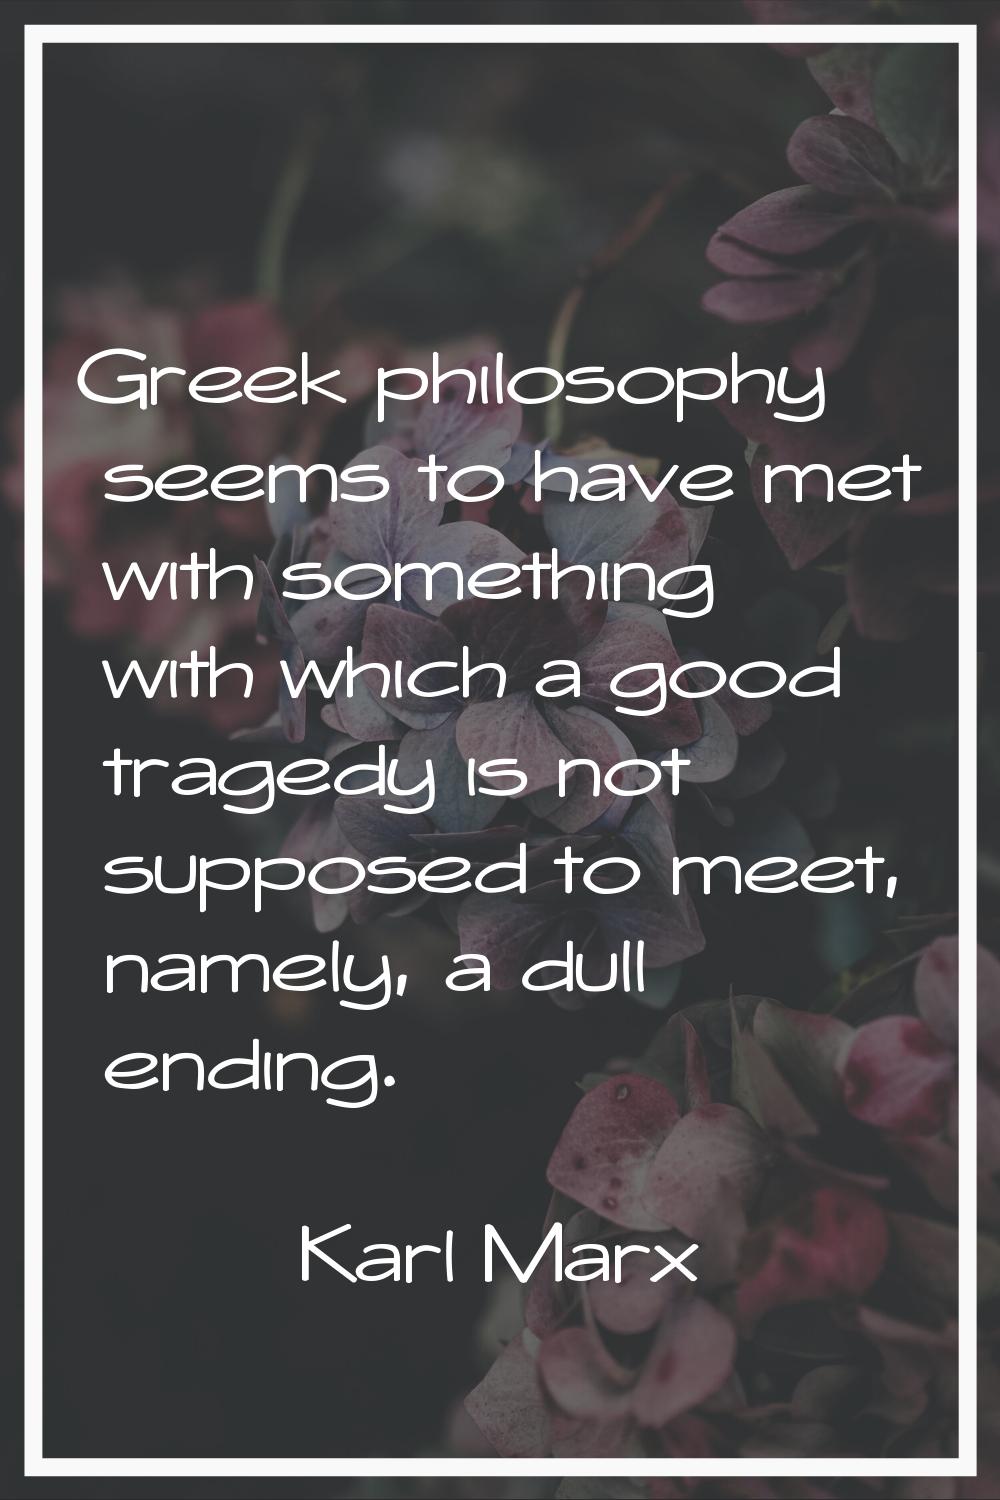 Greek philosophy seems to have met with something with which a good tragedy is not supposed to meet